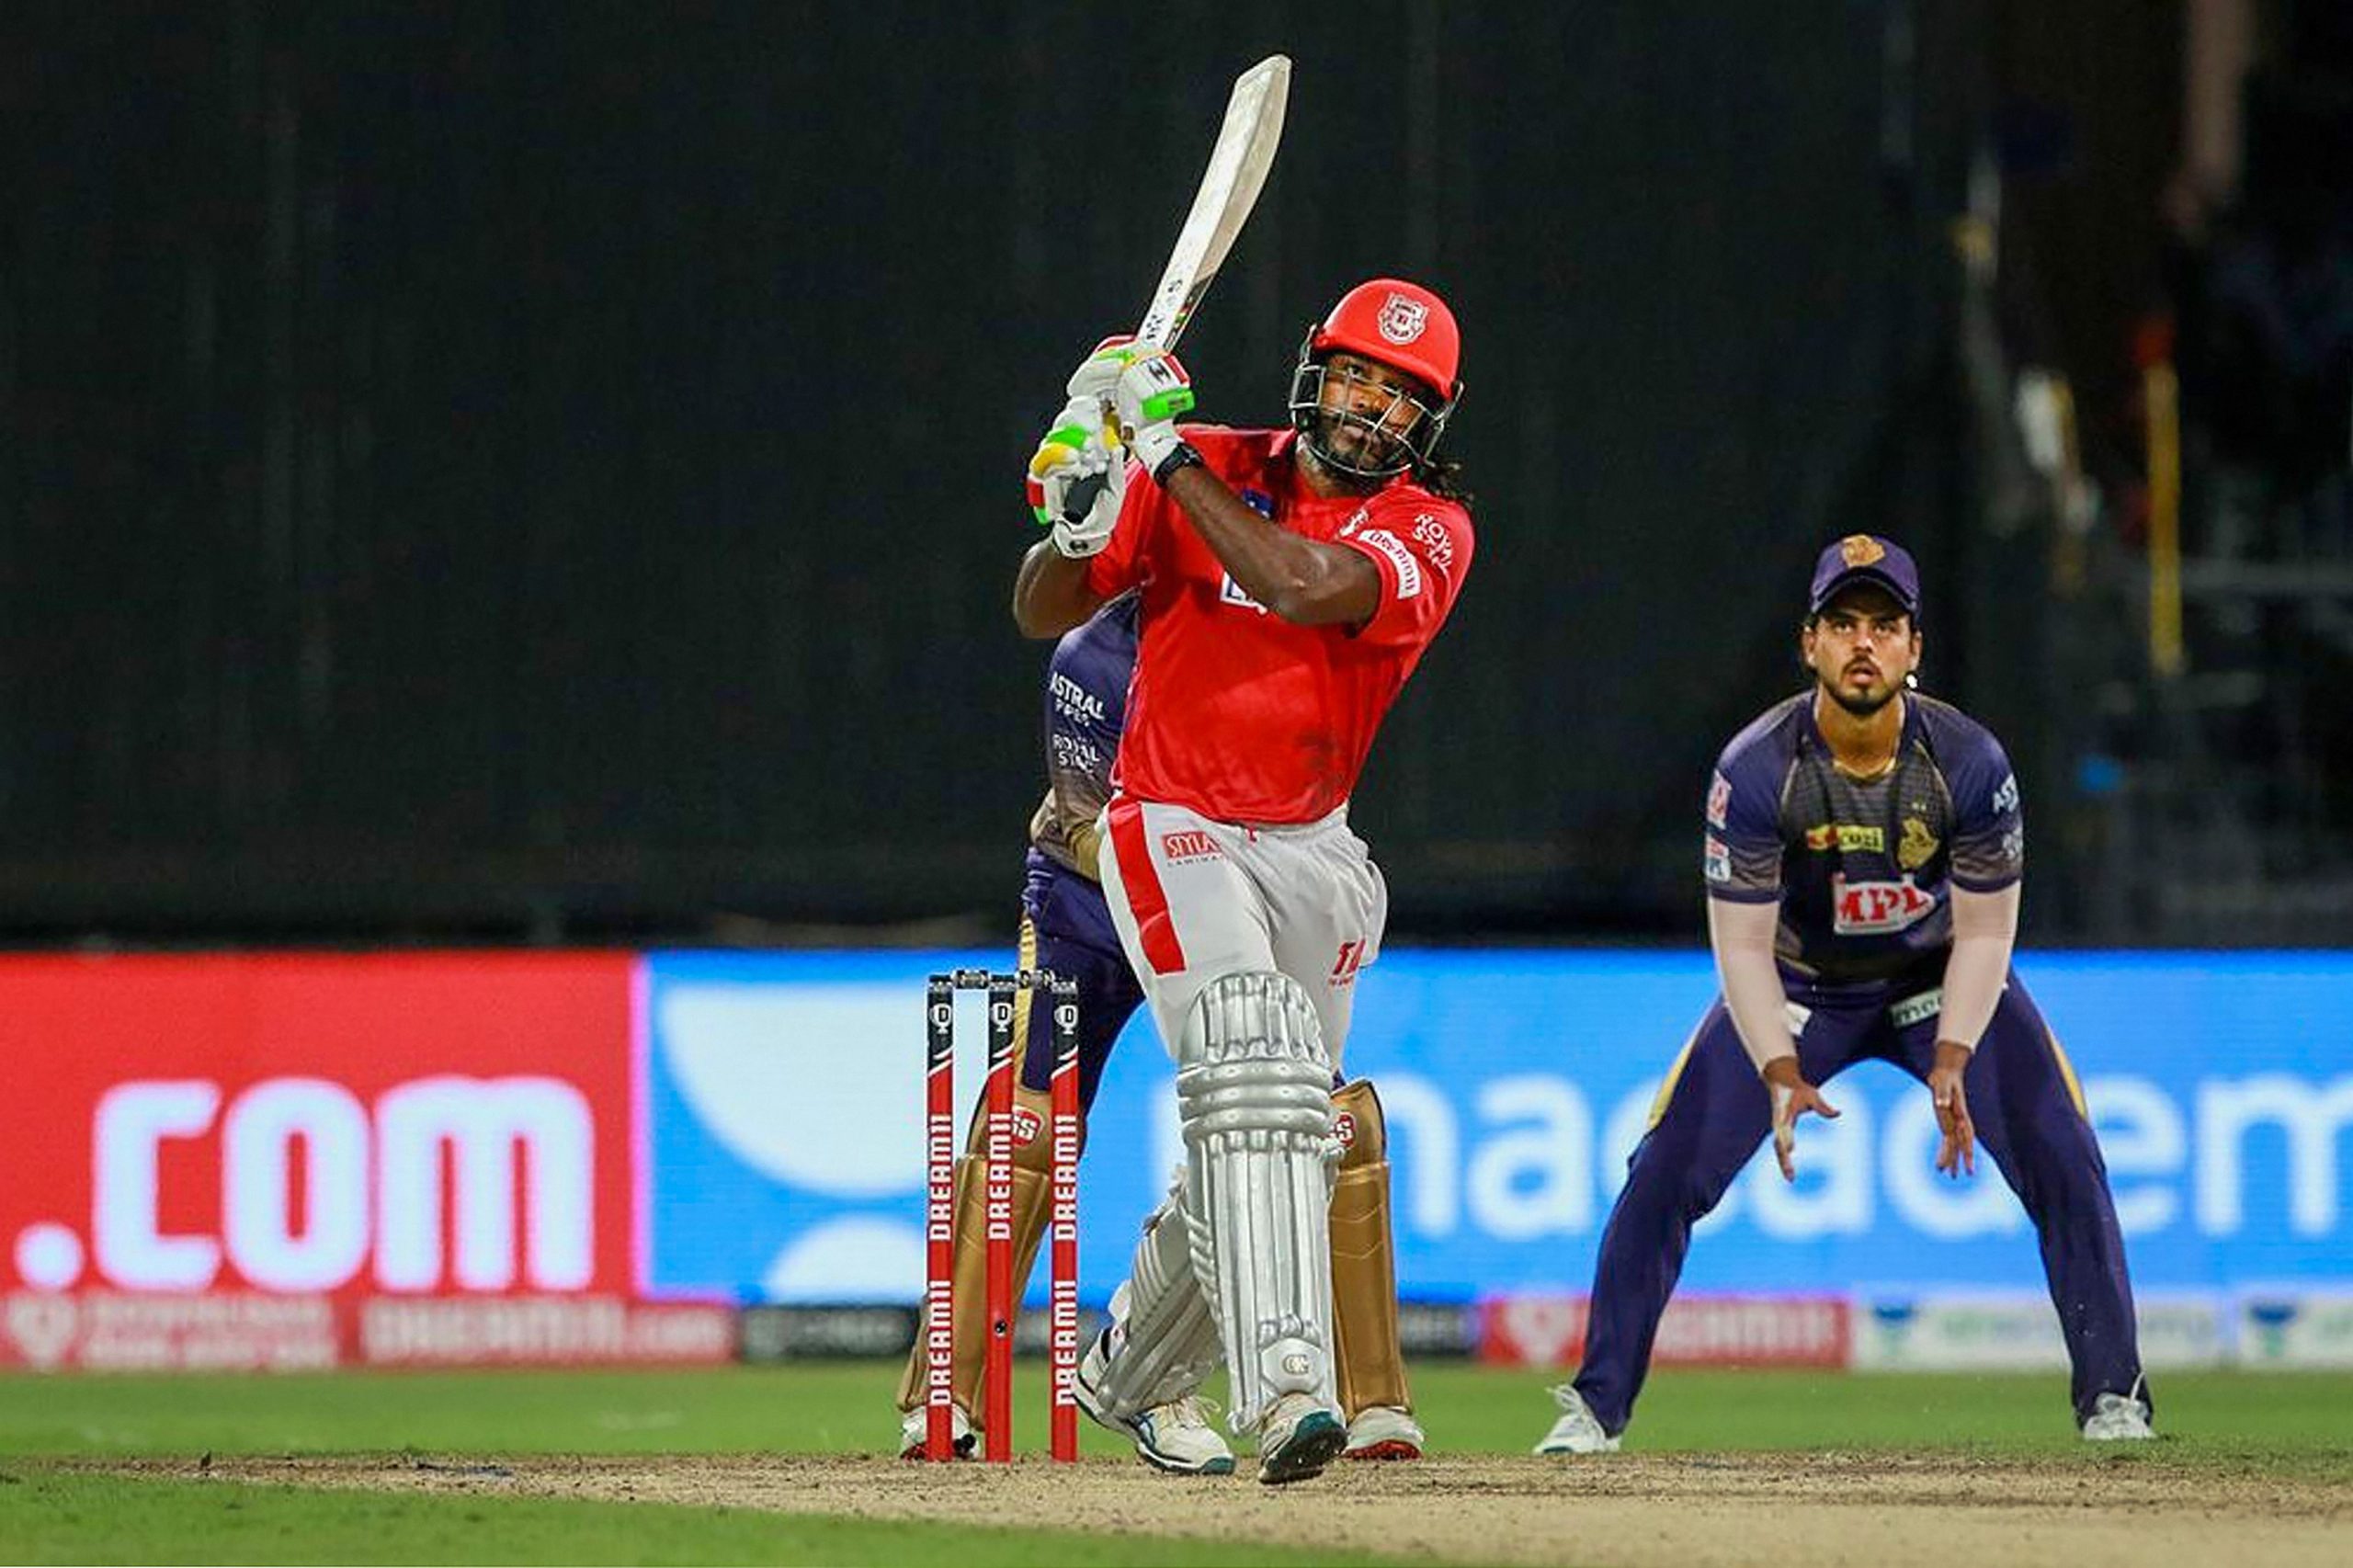 ‘Don’t retire’: Kings XI Punjab youngsters tell Chris Gayle